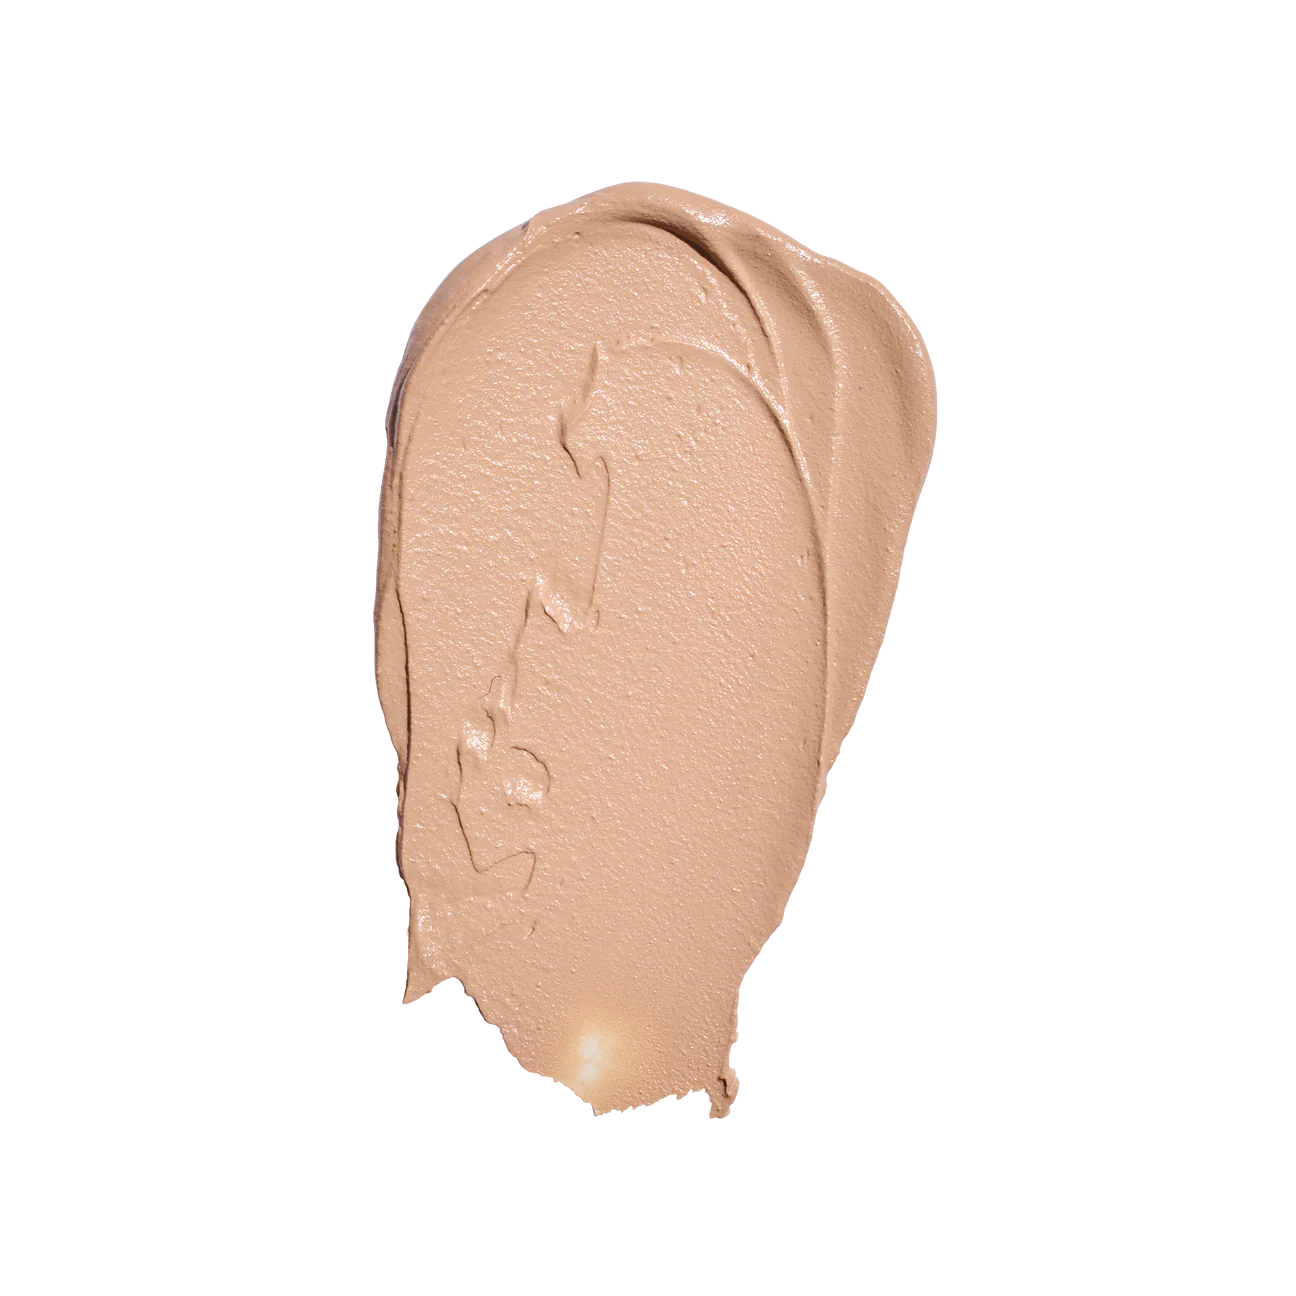 Colorescience Tint Du Soleil Whipped Mineral Foundation SPF 30 in Medium